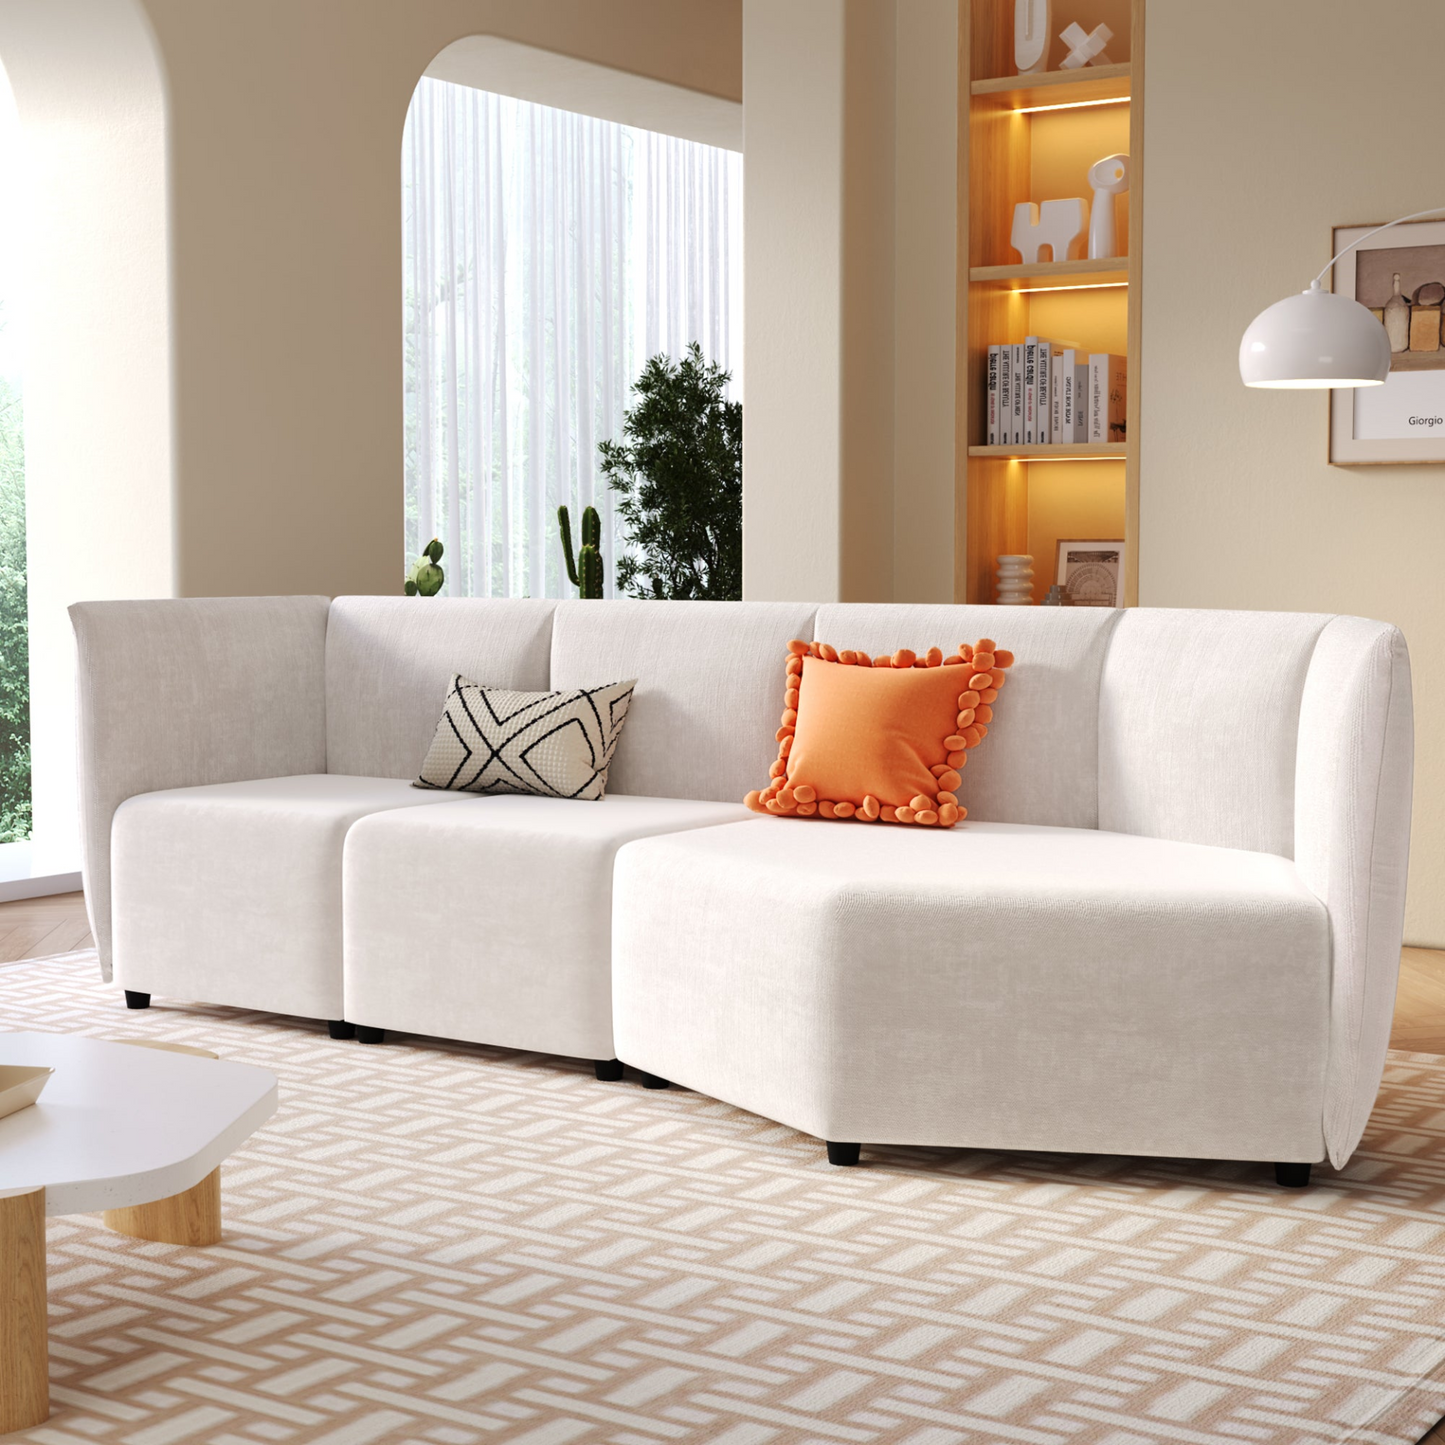 Stylish Sofa Set with Polyester Upholstery with Adjustable Back with Free Combination for Living Room, Goodies N Stuff